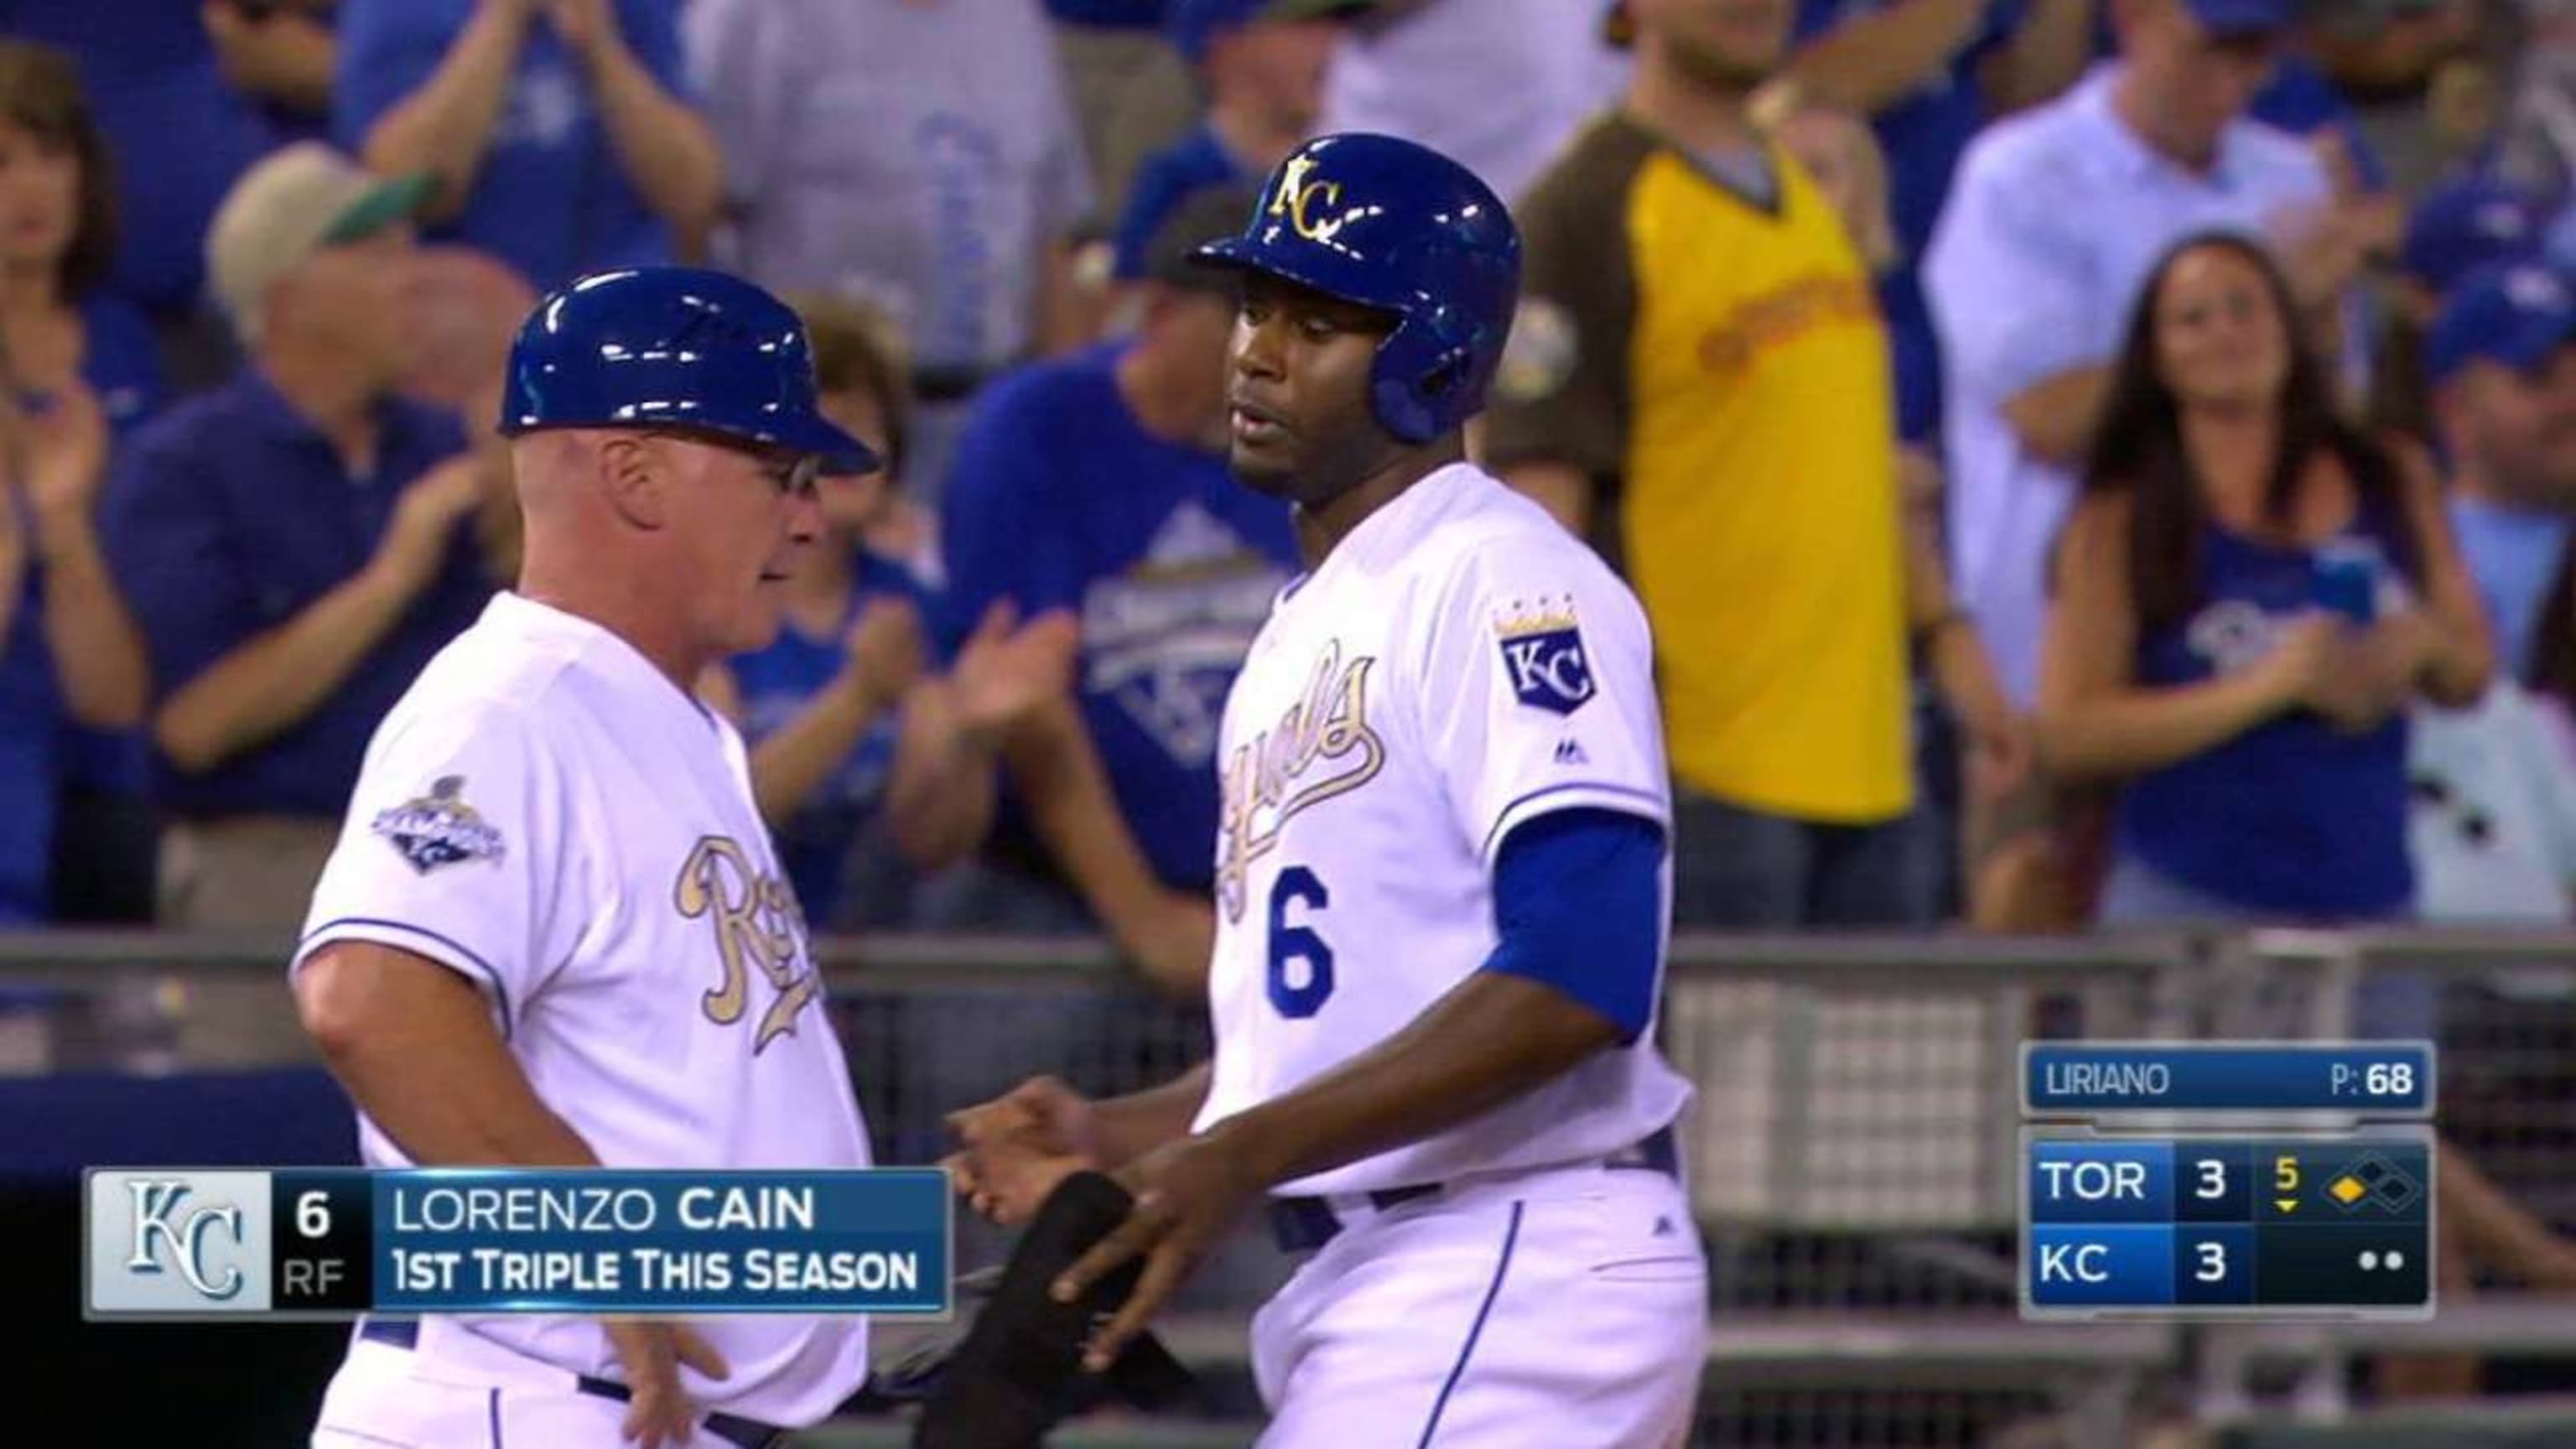 A late bloomer, Royals outfielder Lorenzo Cain making up for lost time